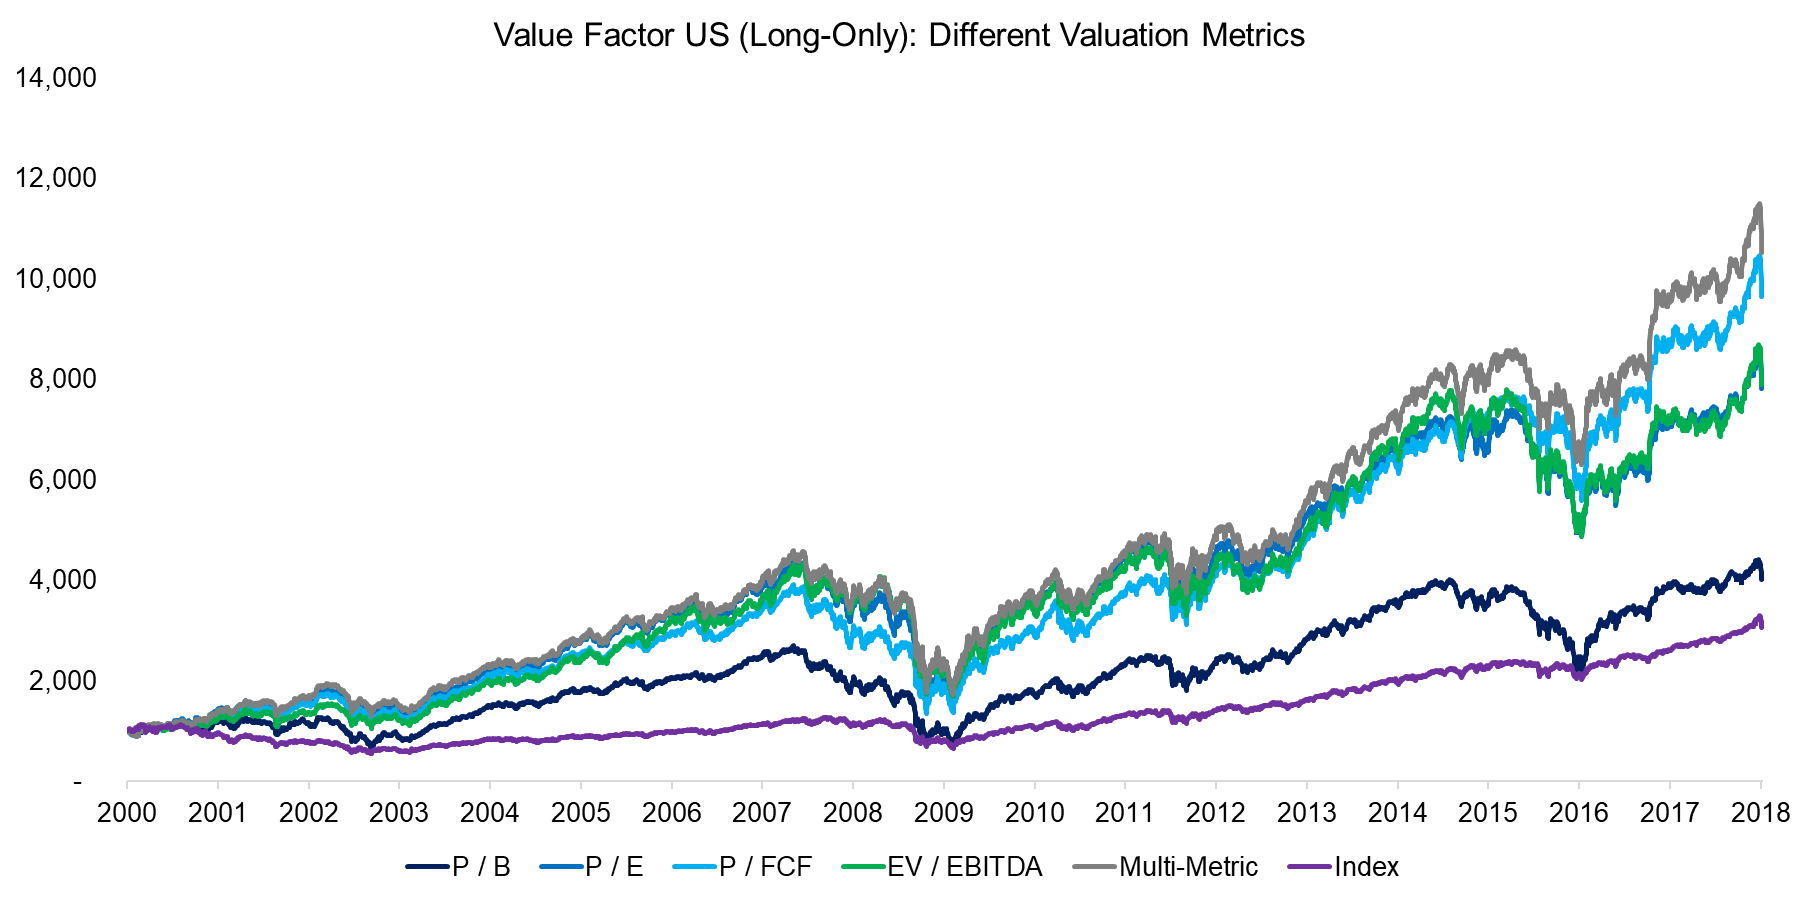 Value Factor US (Long-Only) Different Valuation Metrics